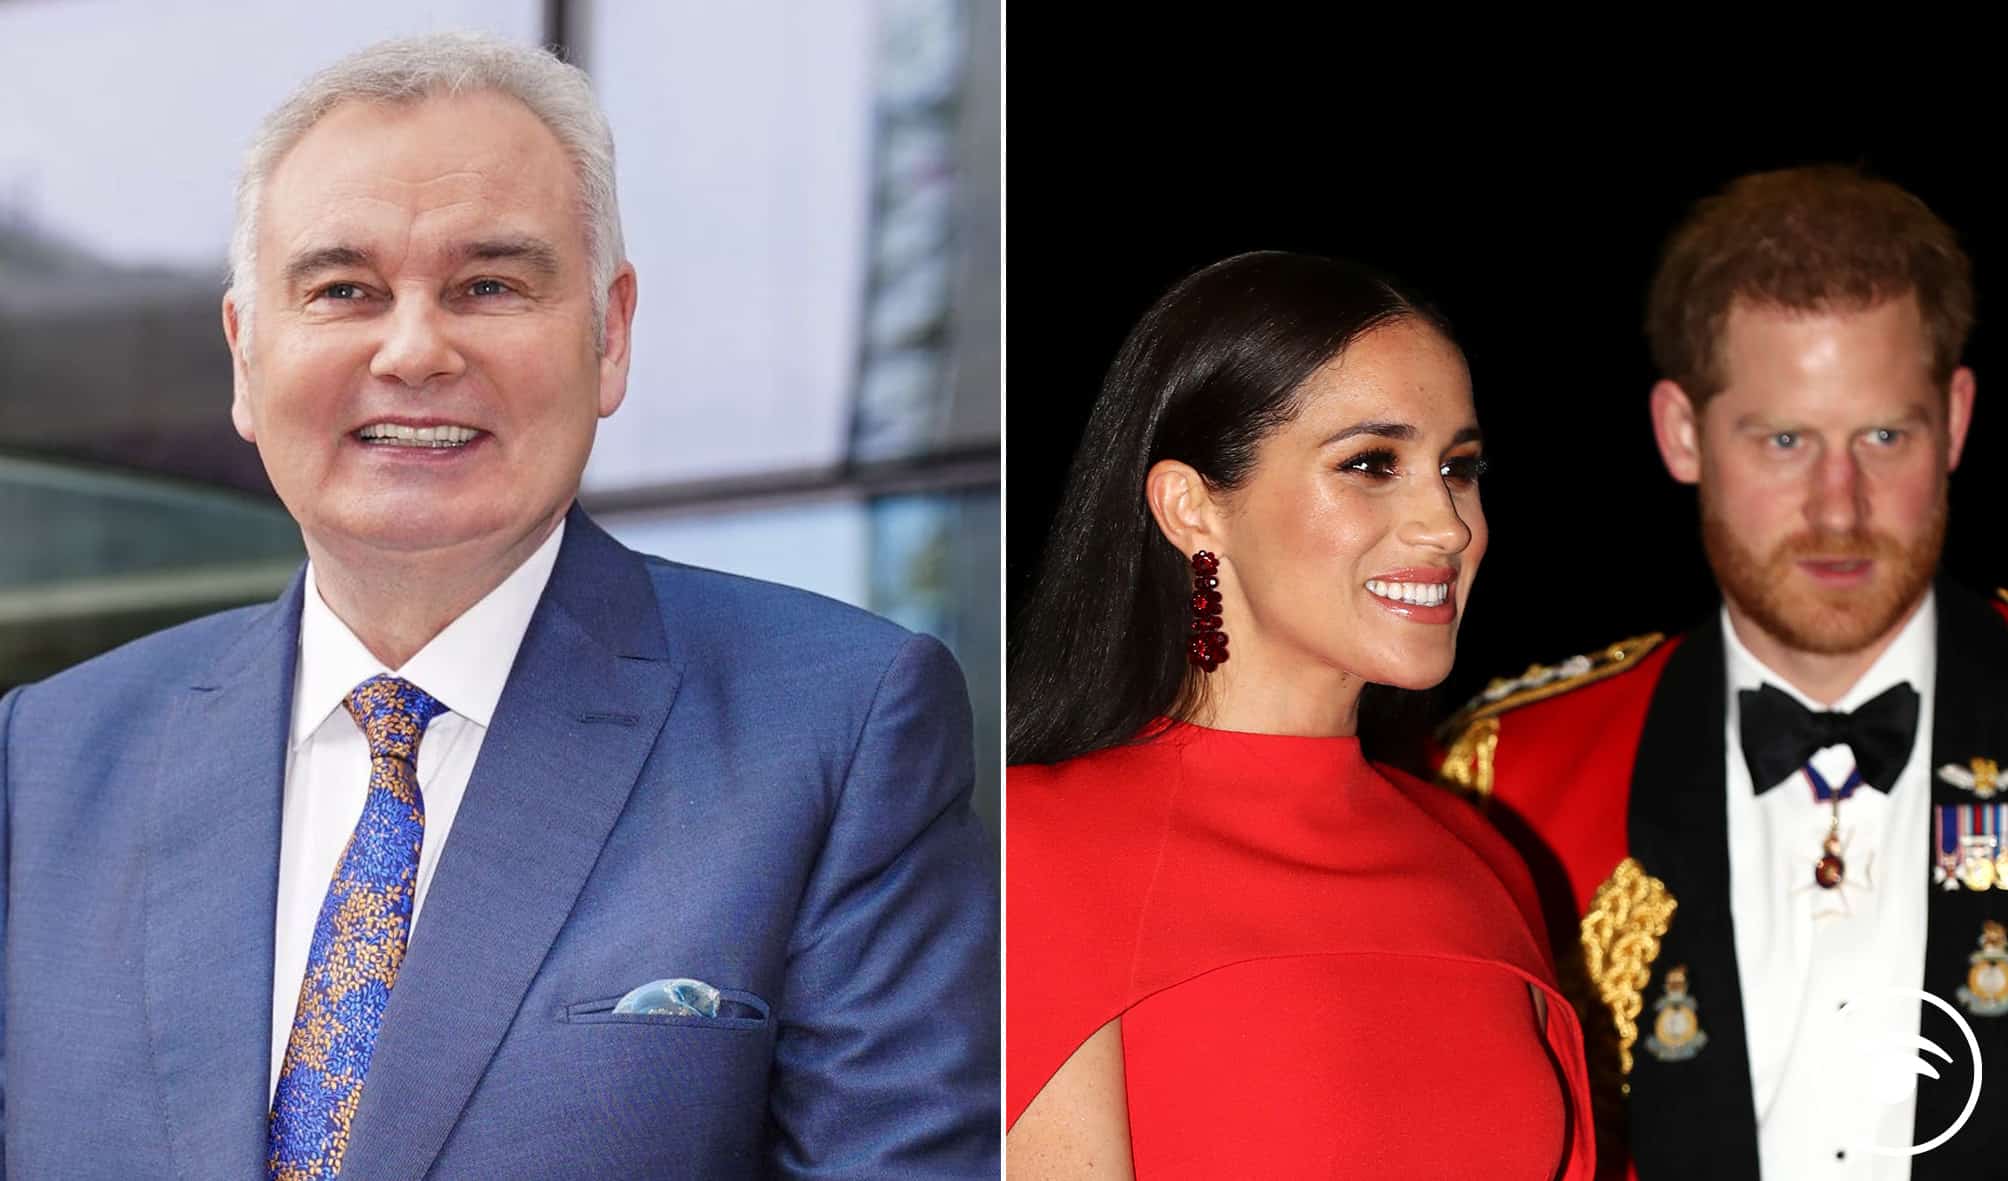 ‘Inciting violence:’ Eamonn Holmes hit with hundreds of Ofcom complaints after Harry and Meghan comments